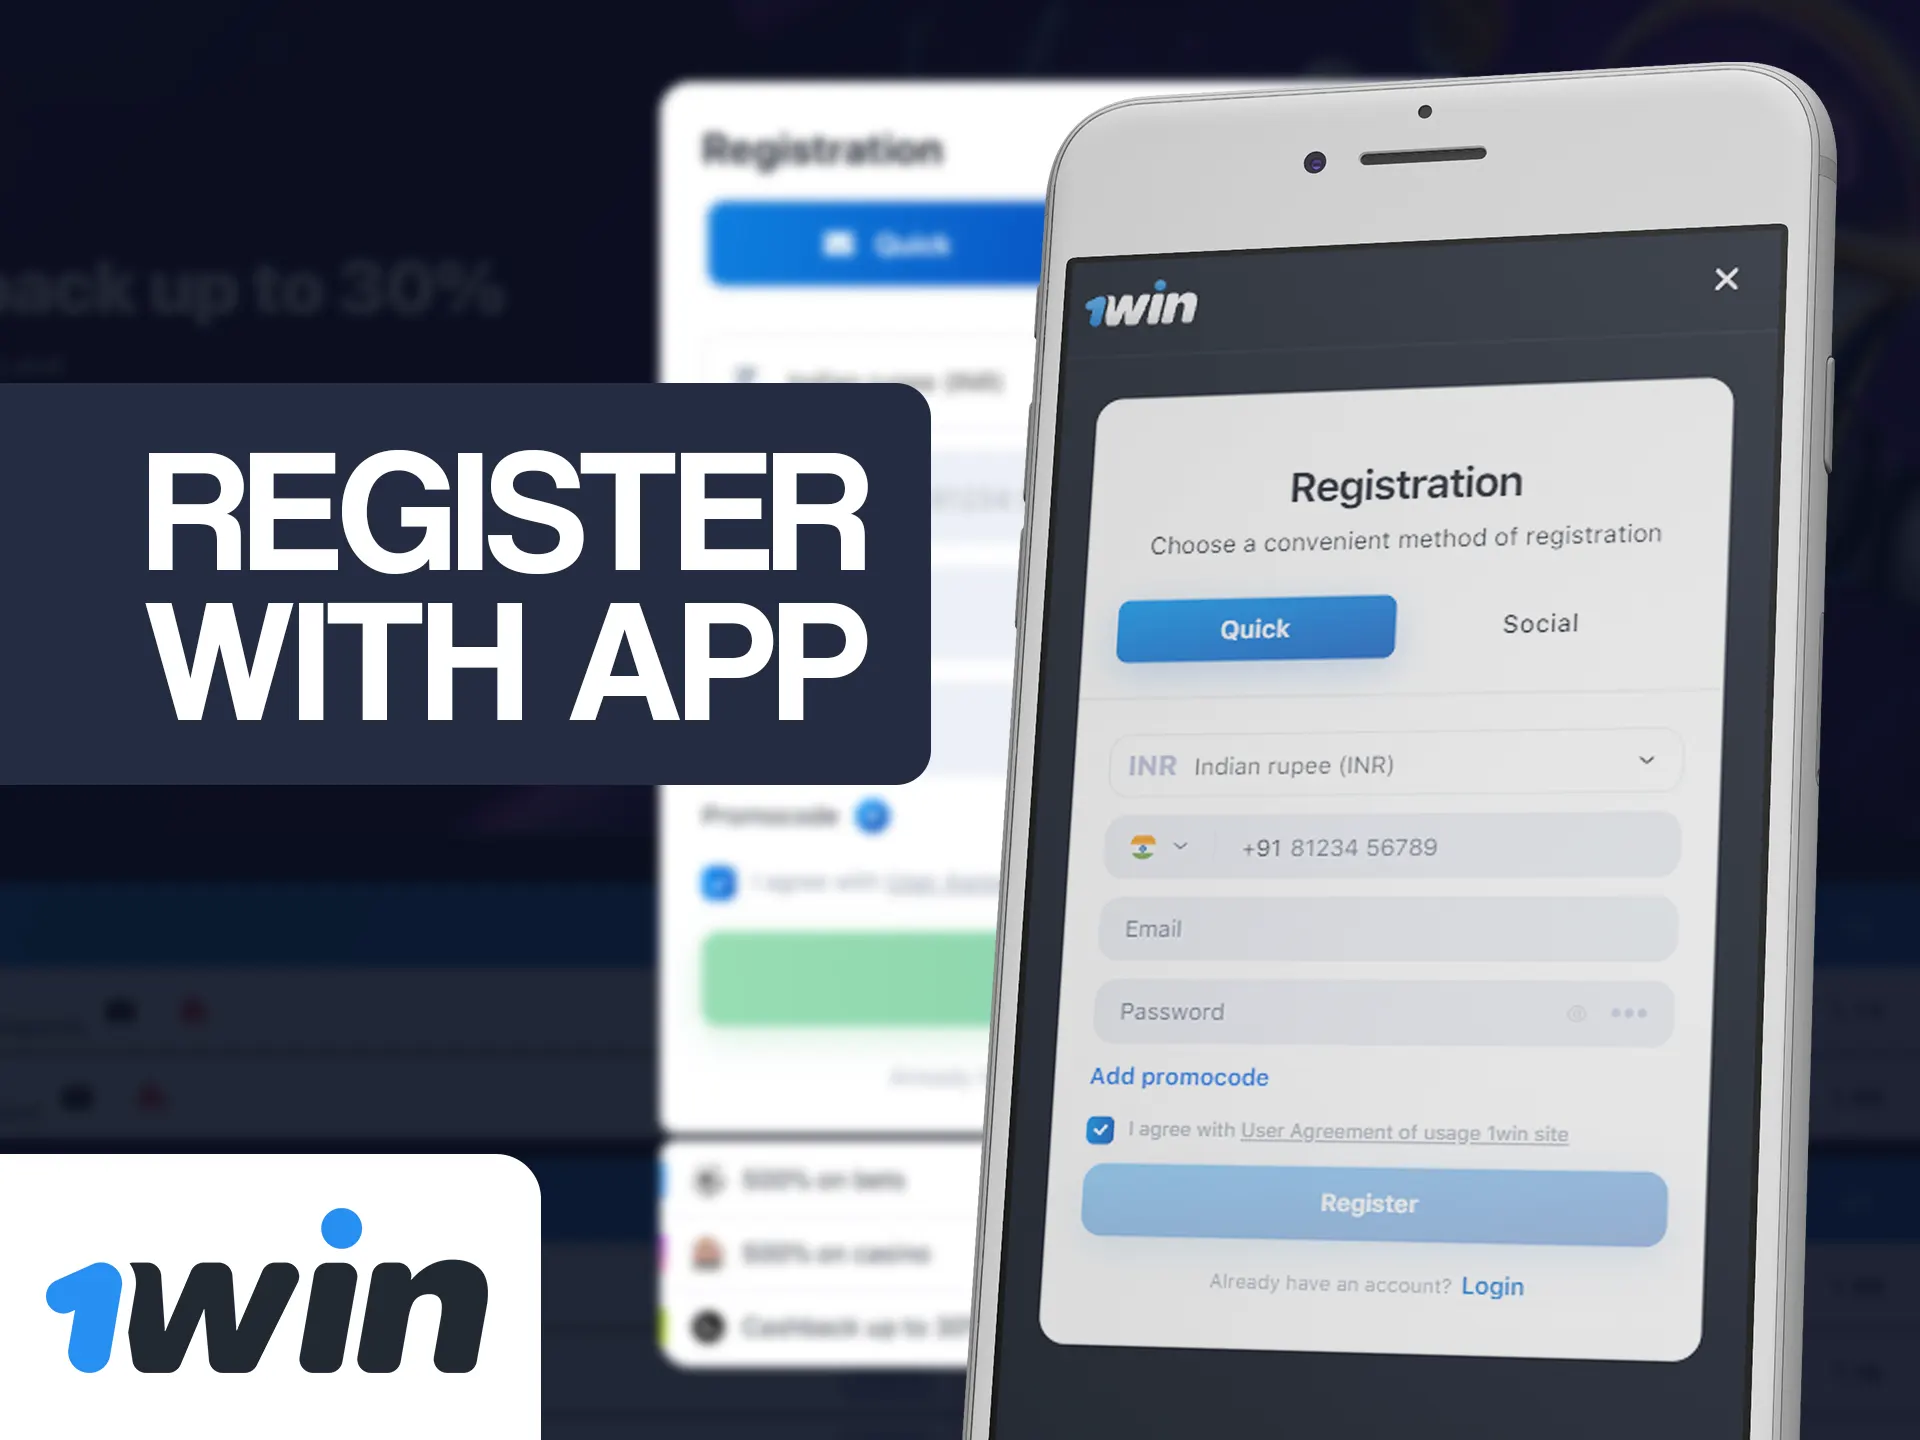 Make new 1win account on special registration page.